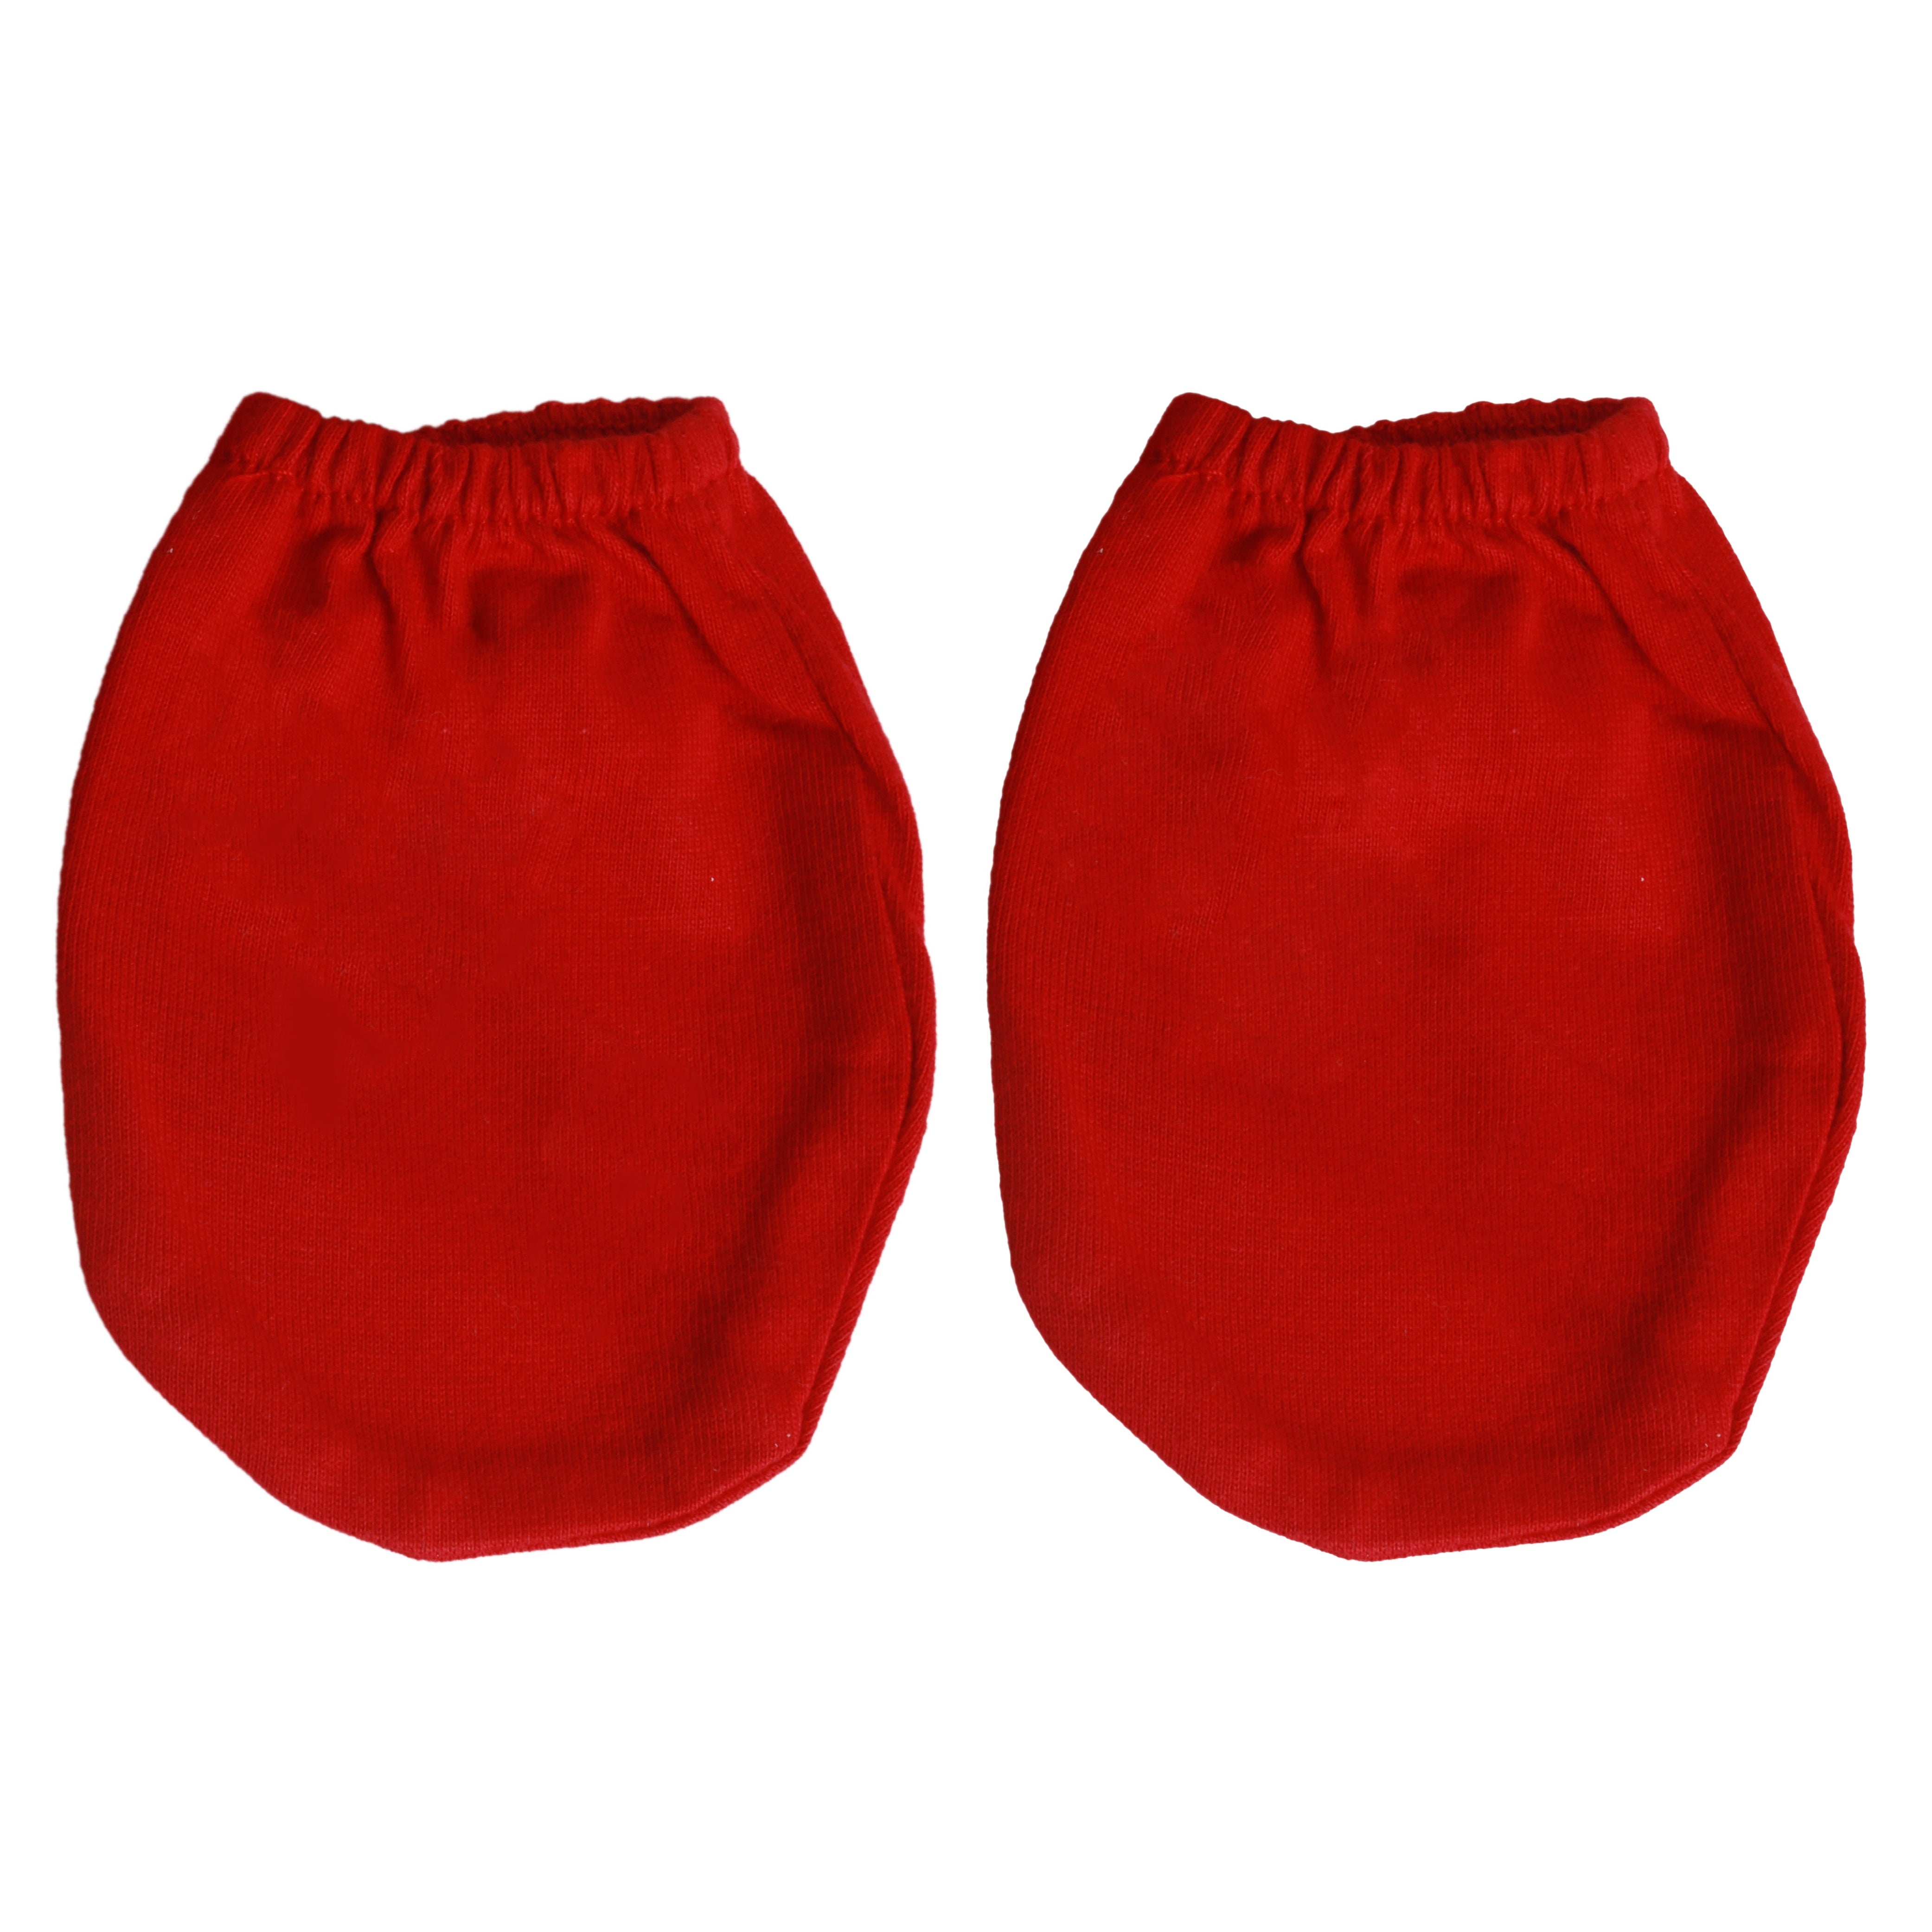 Little By Little 100% Anti Viral, Cotton, Reusable, Anti bacterial & Water Repellent Baby Bibs, Booties, Mittens - Red